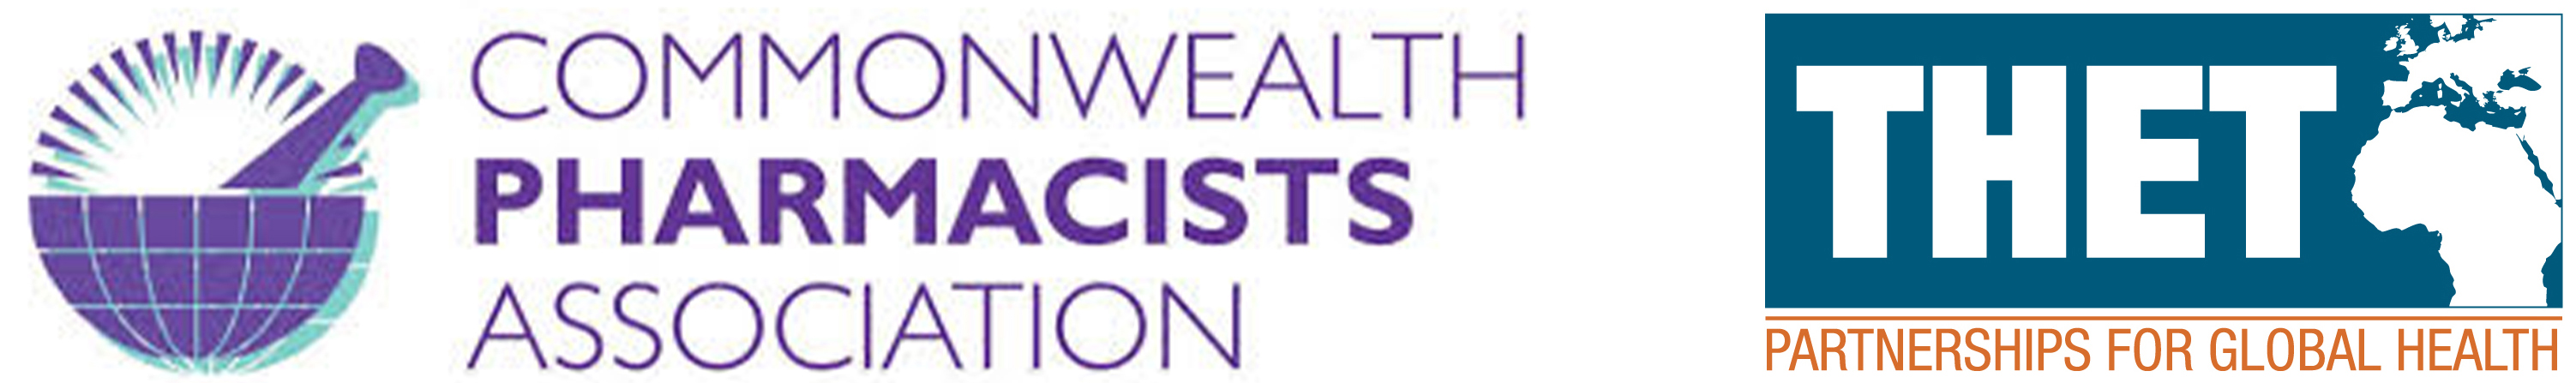 Commonwealth Pharmacist Association and THET logos